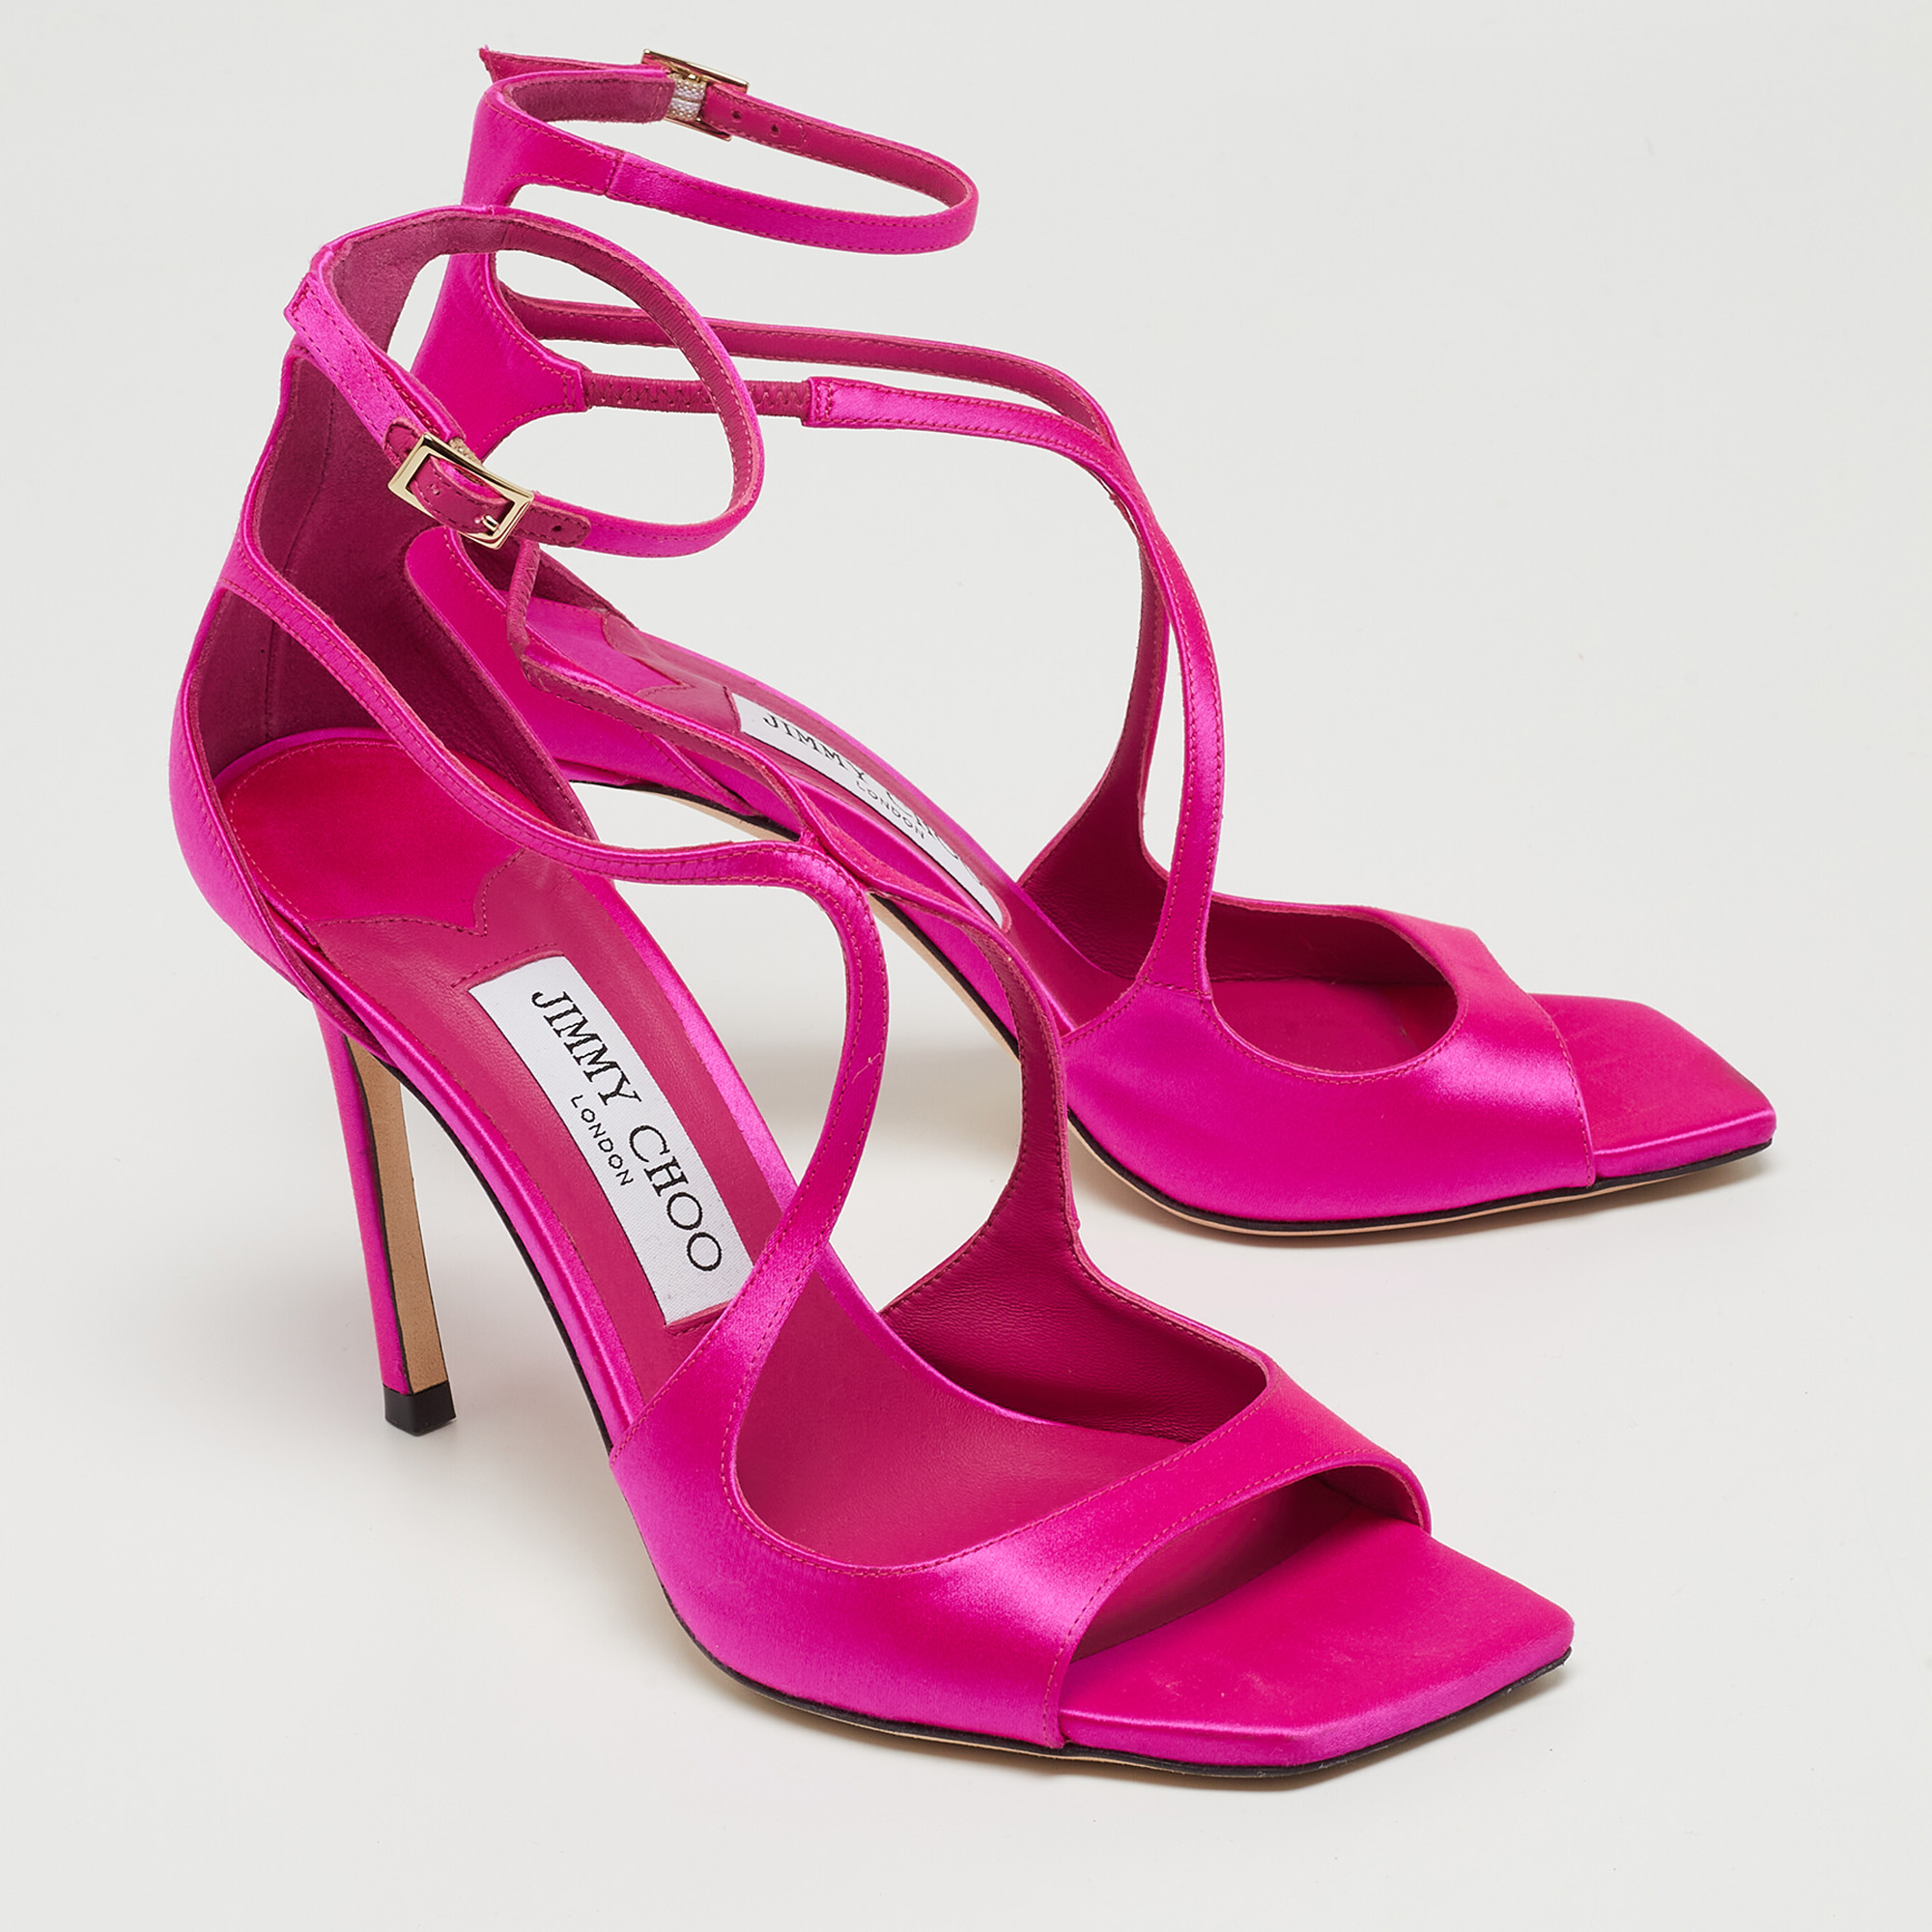 Jimmy Choo Pink Satin Azia 95 Ankle Strap Sandals Size 36.5